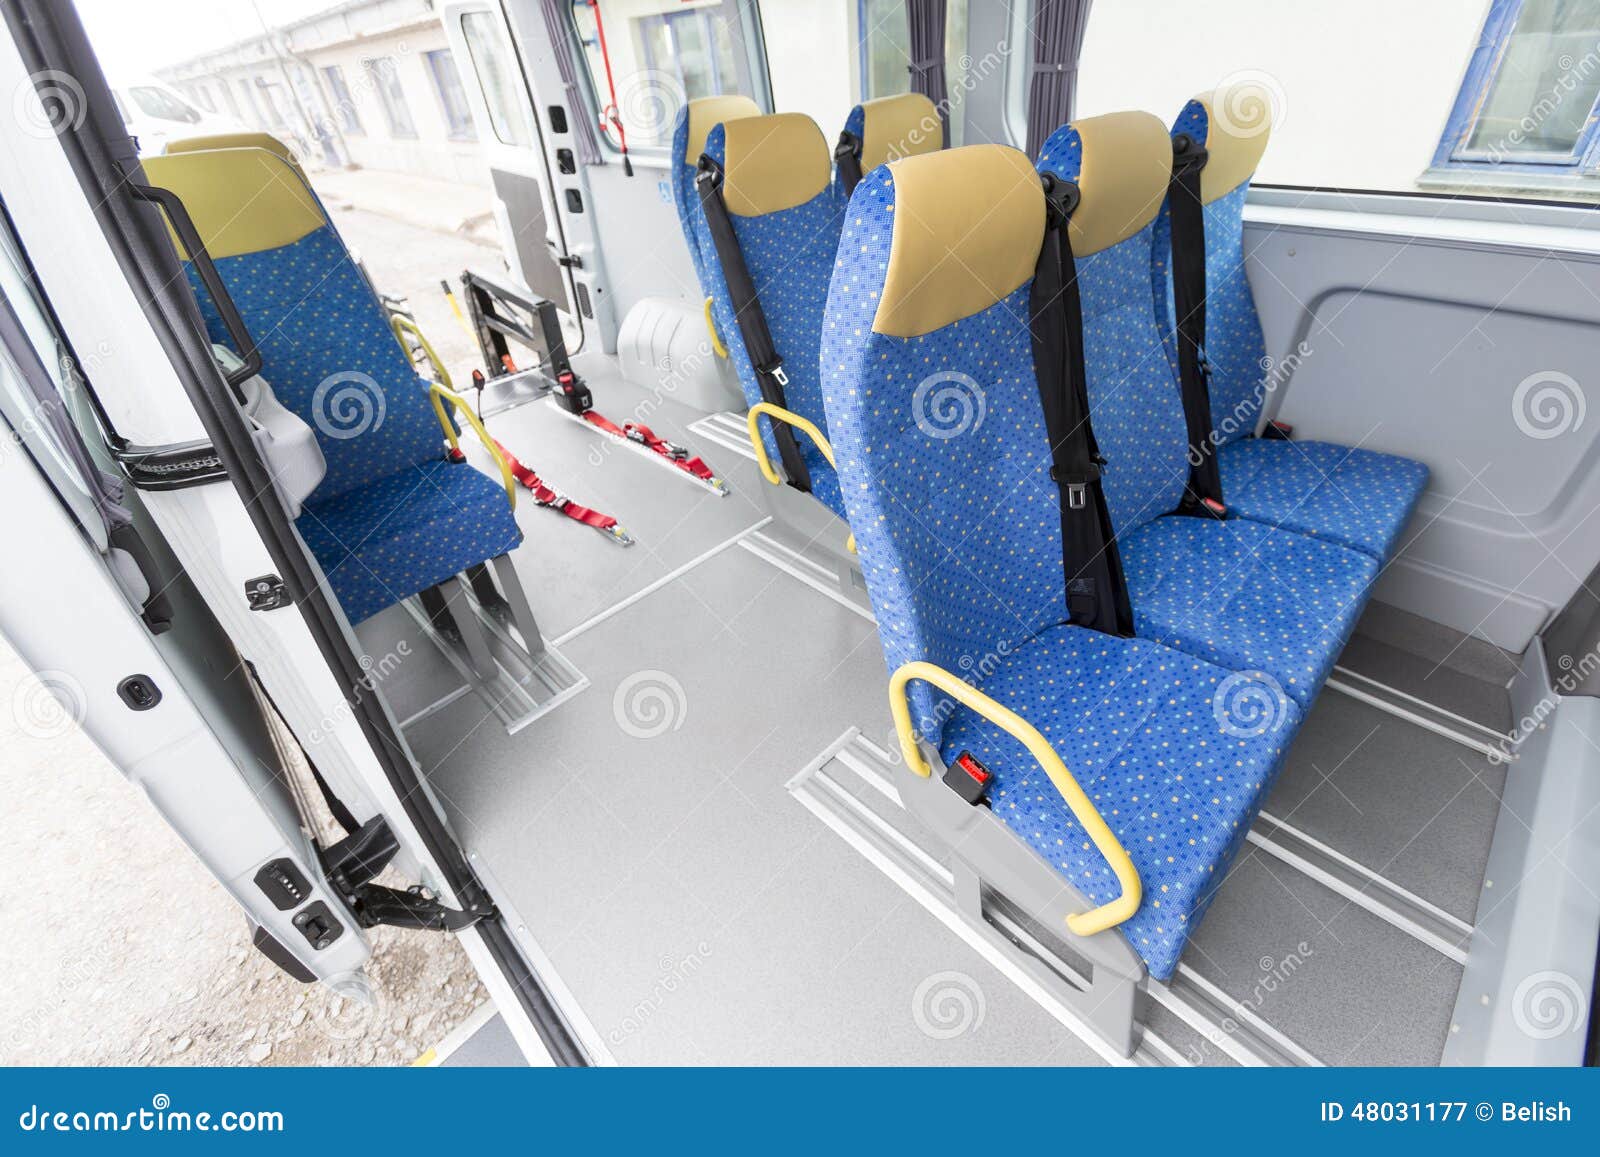 minibus physically disabled